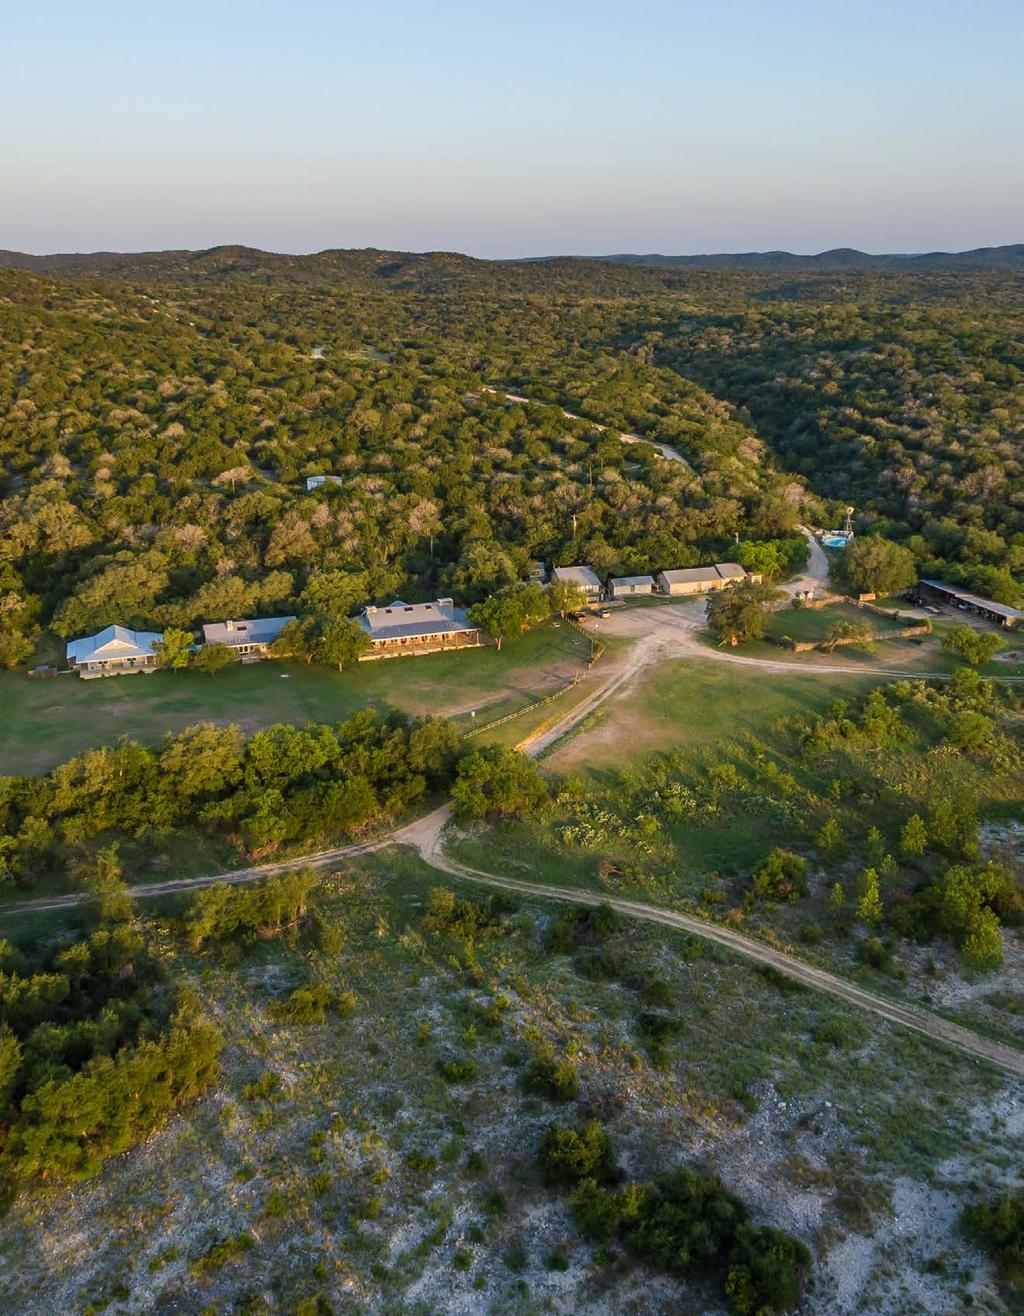 PIÑON RANCH Located on the southern edge of the Edwards Plateau just before the hills give way to the South Texas Plains, Piñon Ranch s 10,318+/- acres are a fusion of the Hill Country and South